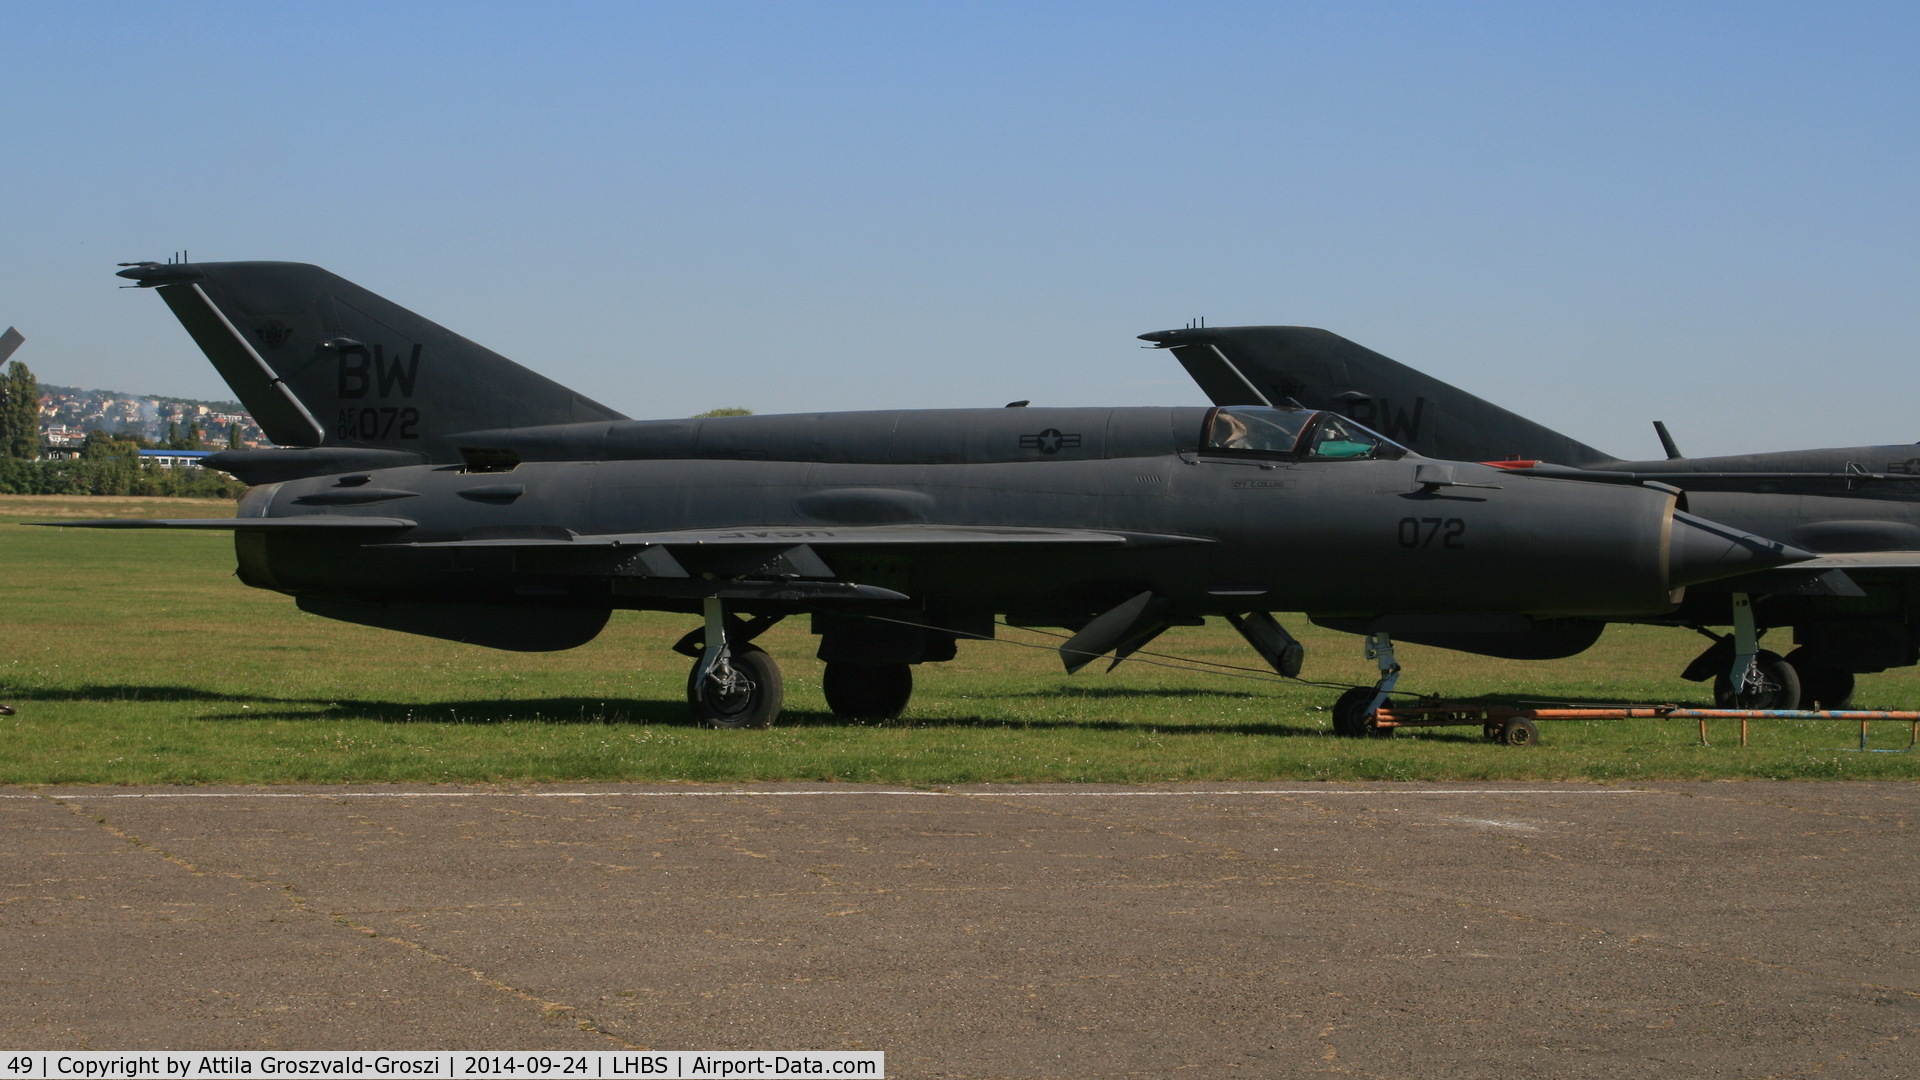 49, 1979 Mikoyan-Gurevich MiG-21bis 75AP C/N 75081510, Budaörs Airport, Hungary. 2014 was painted gray and BW AF04072 page number for filming.